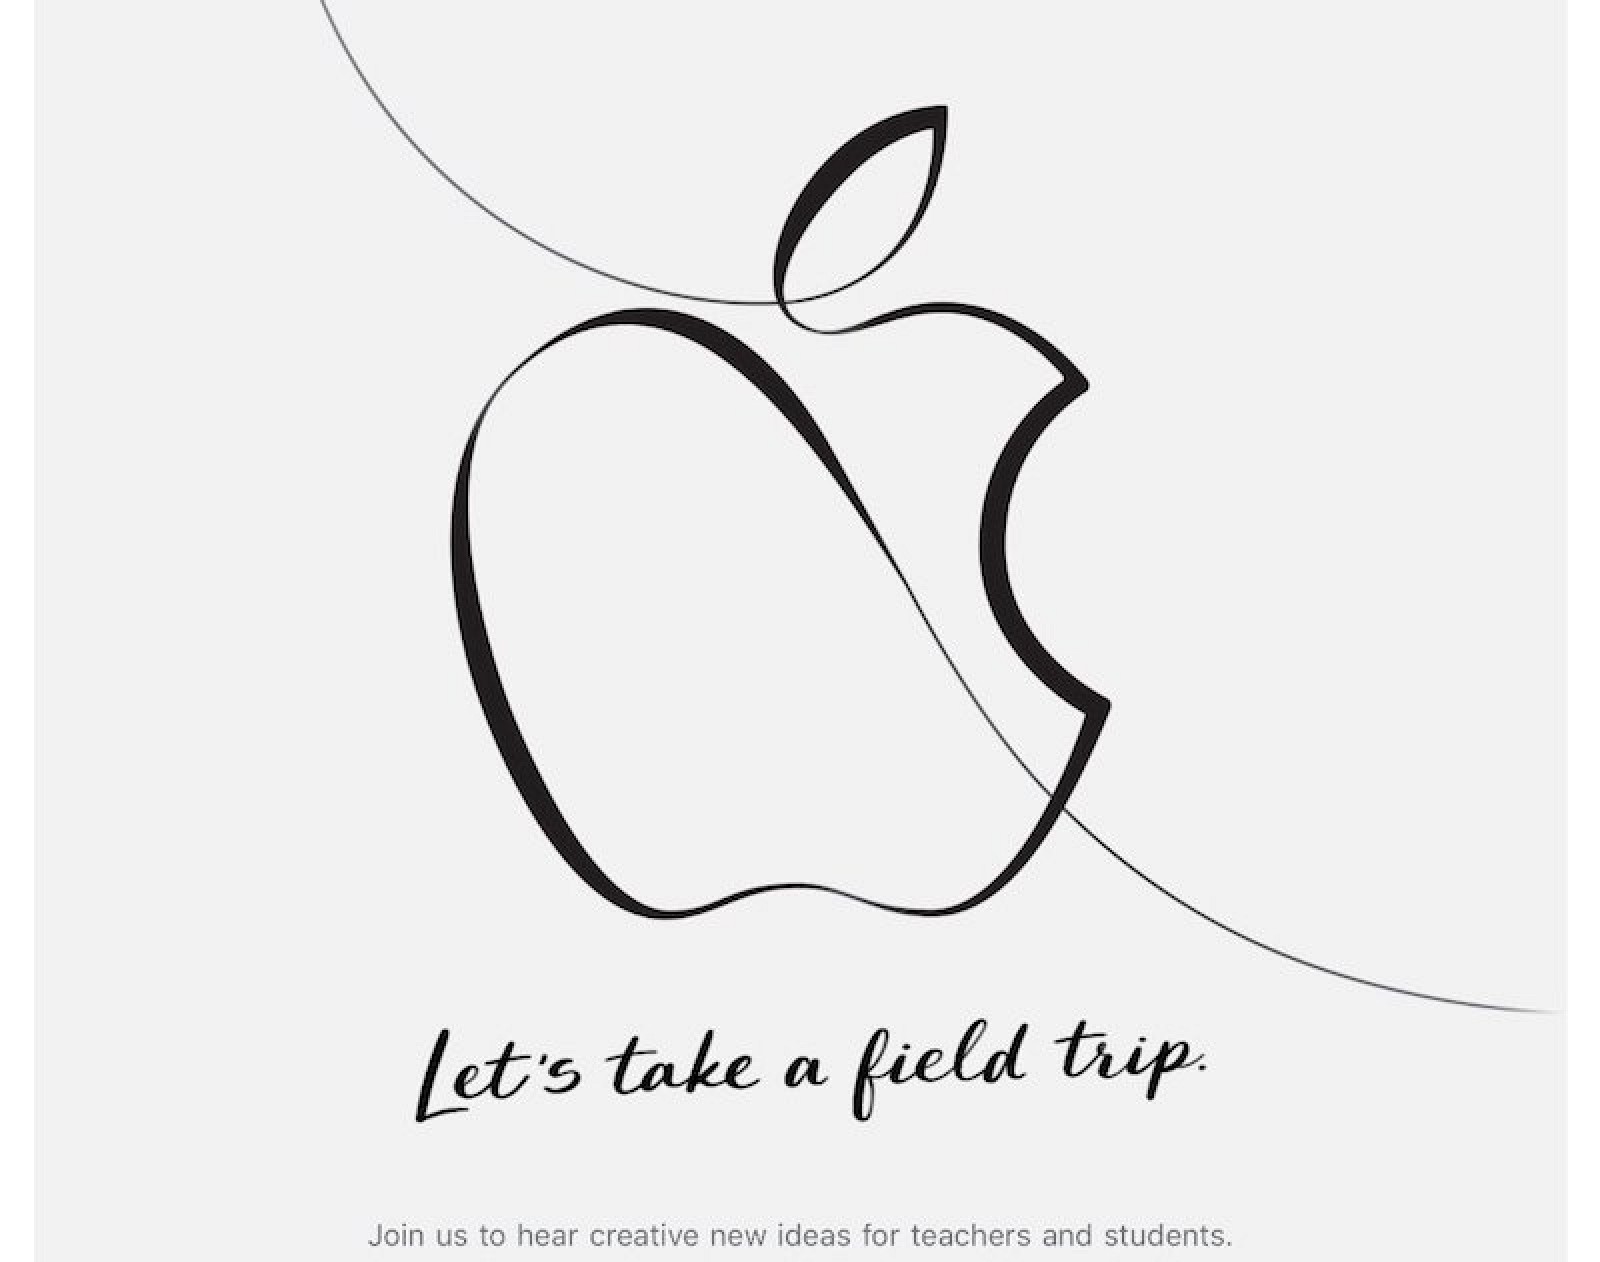 photo of Apple to Host March 27 Event in Chicago: 'Creative New Ideas for Teachers and Students' image